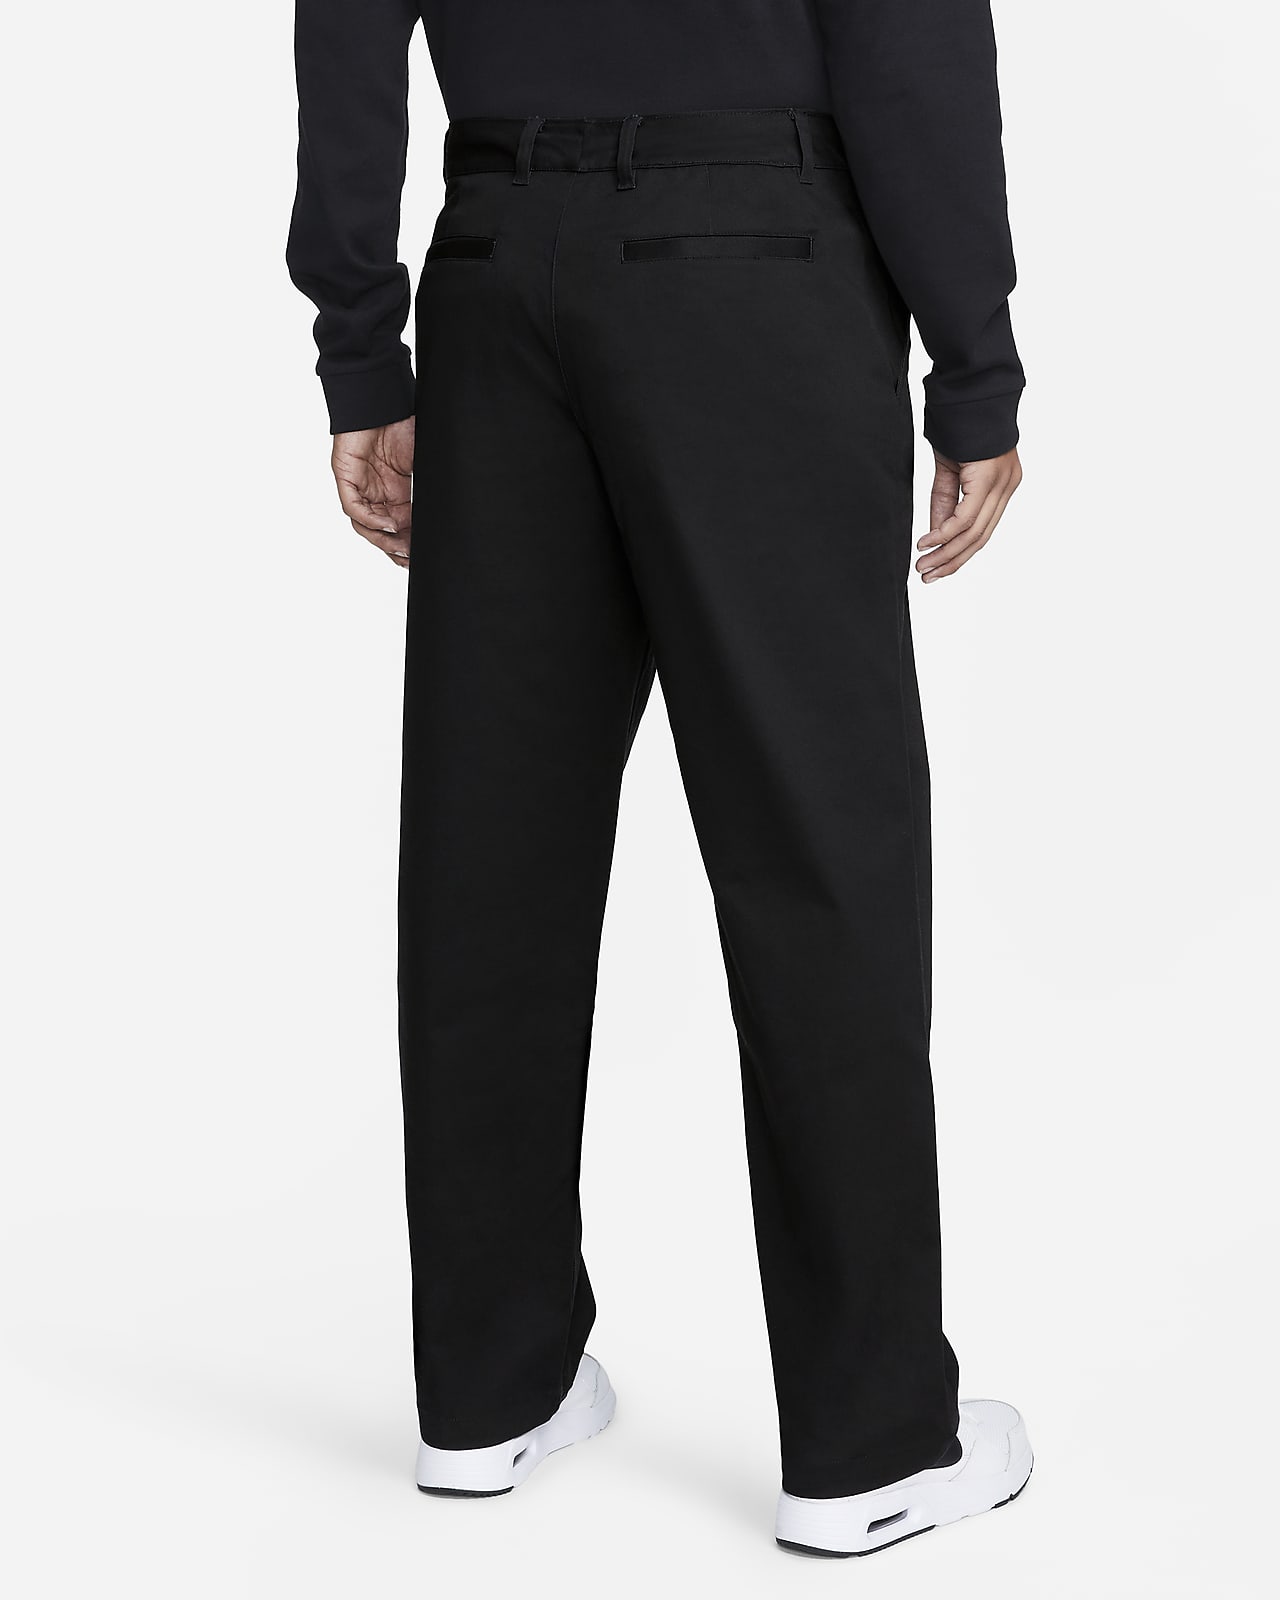 Nike SB DF Novelty Chino Pant - Black – Route One